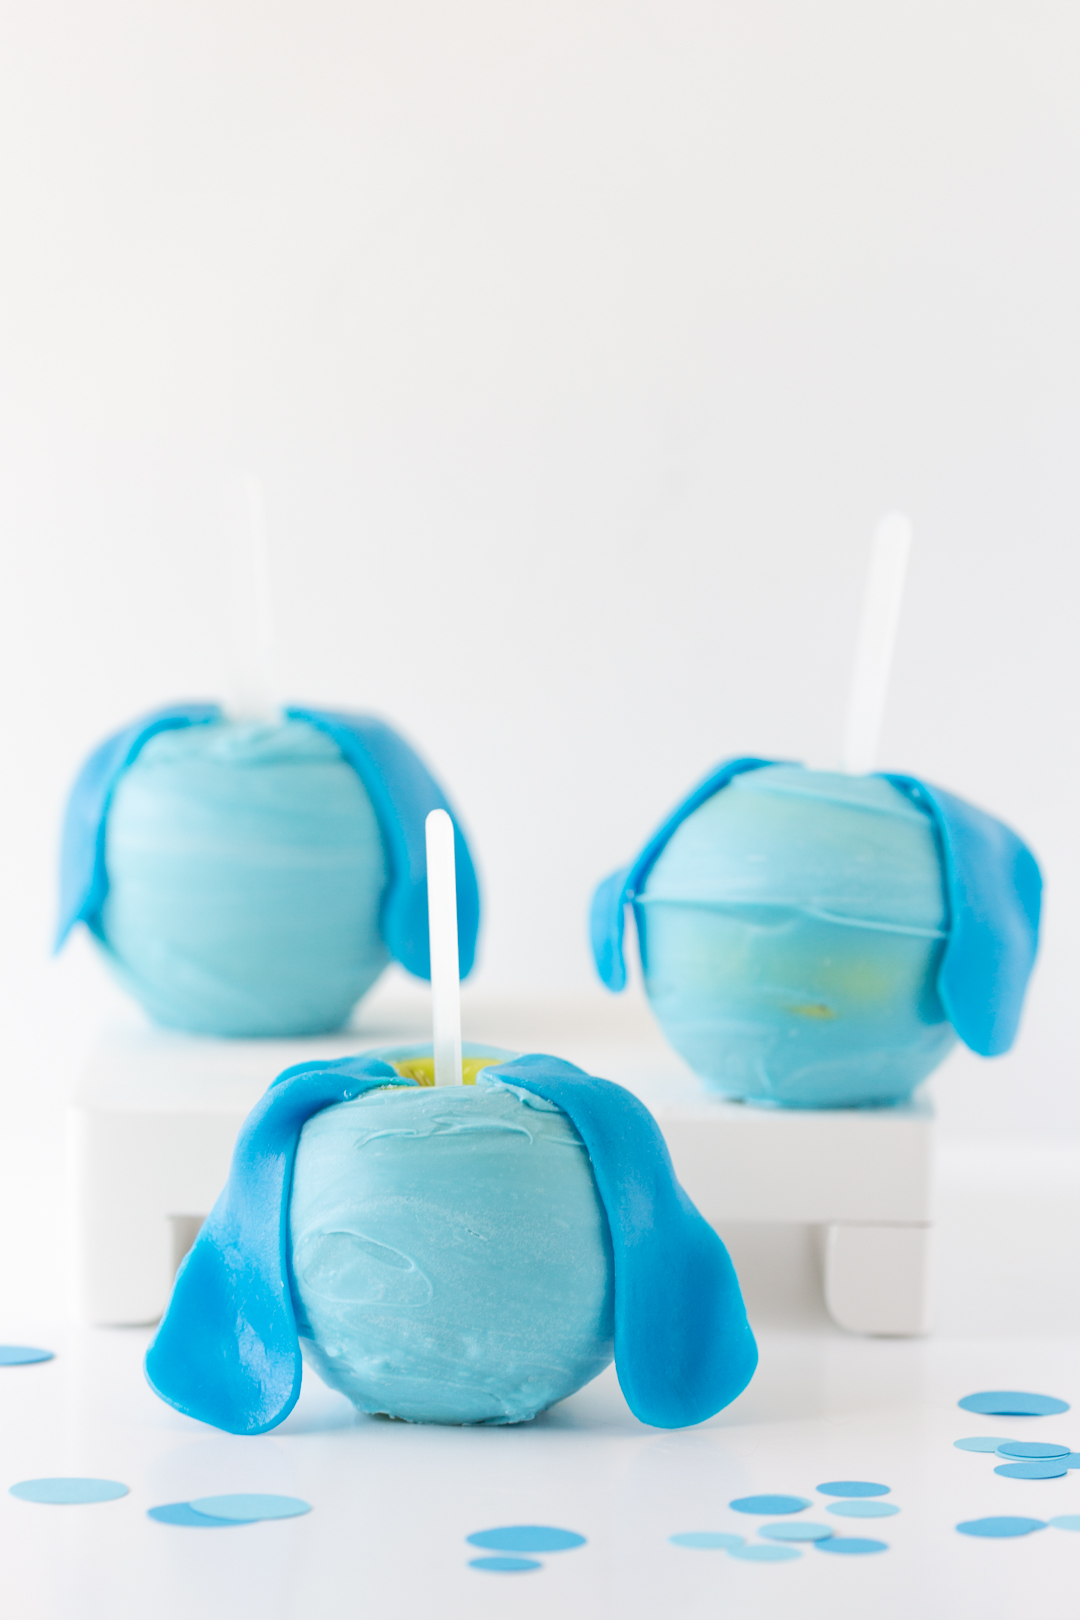 Blues Clues Candy Apples to celebrate movie.